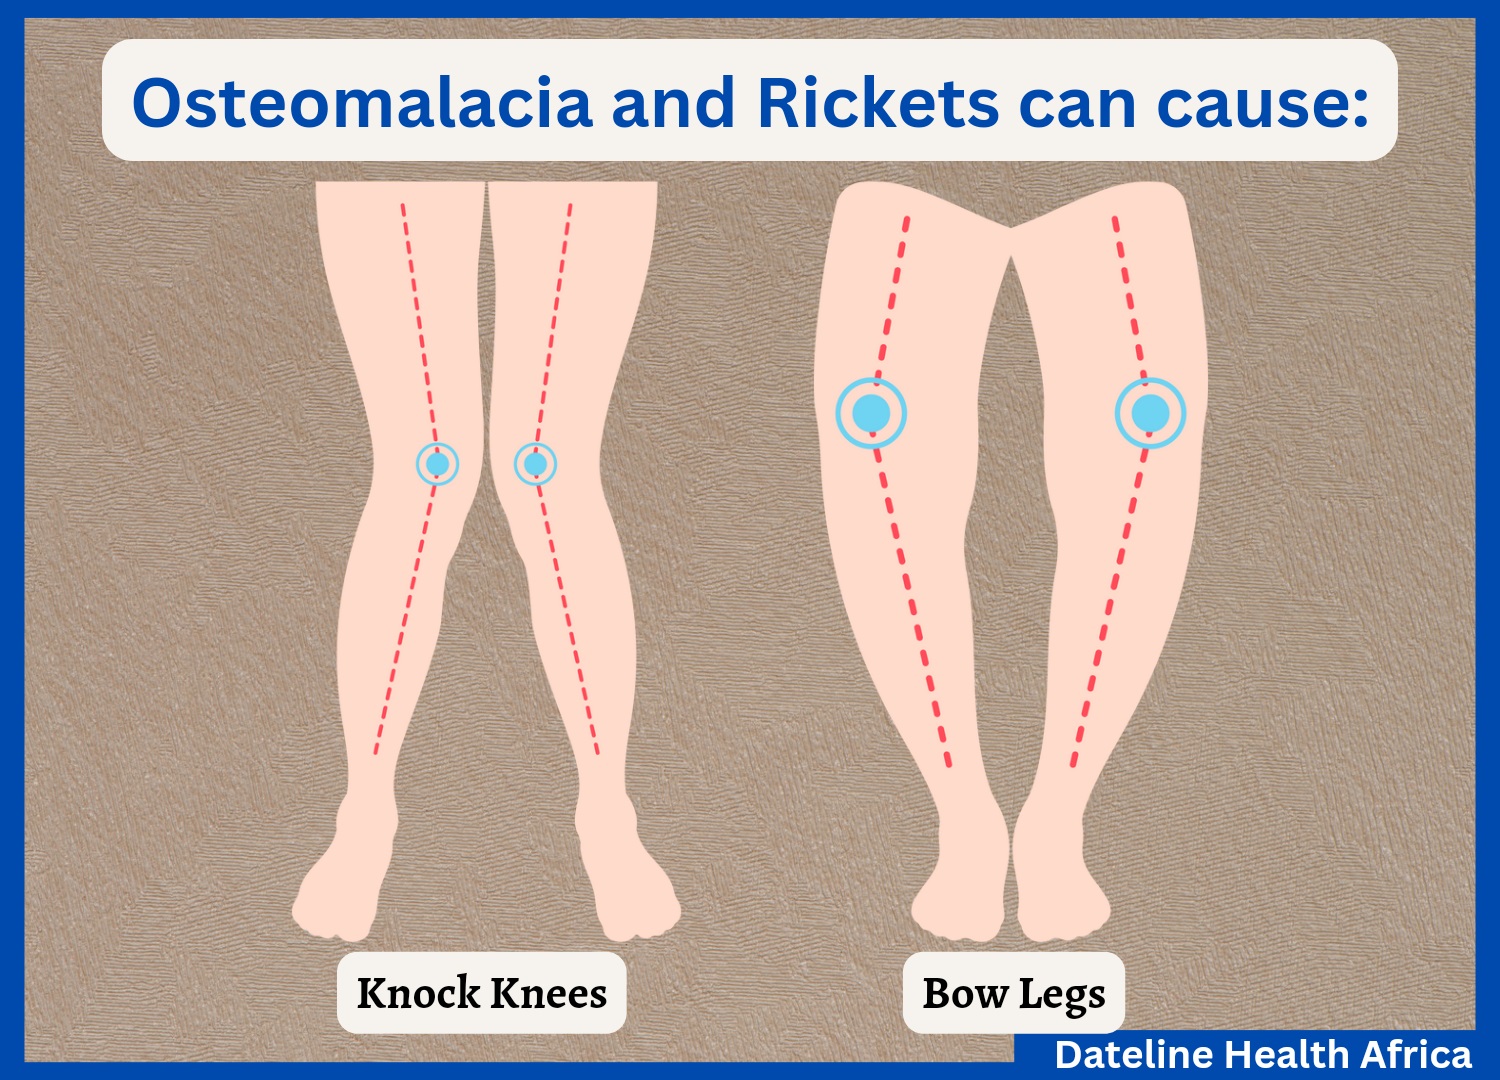 Osteomalacia and rickets causes bow legs and knock knees